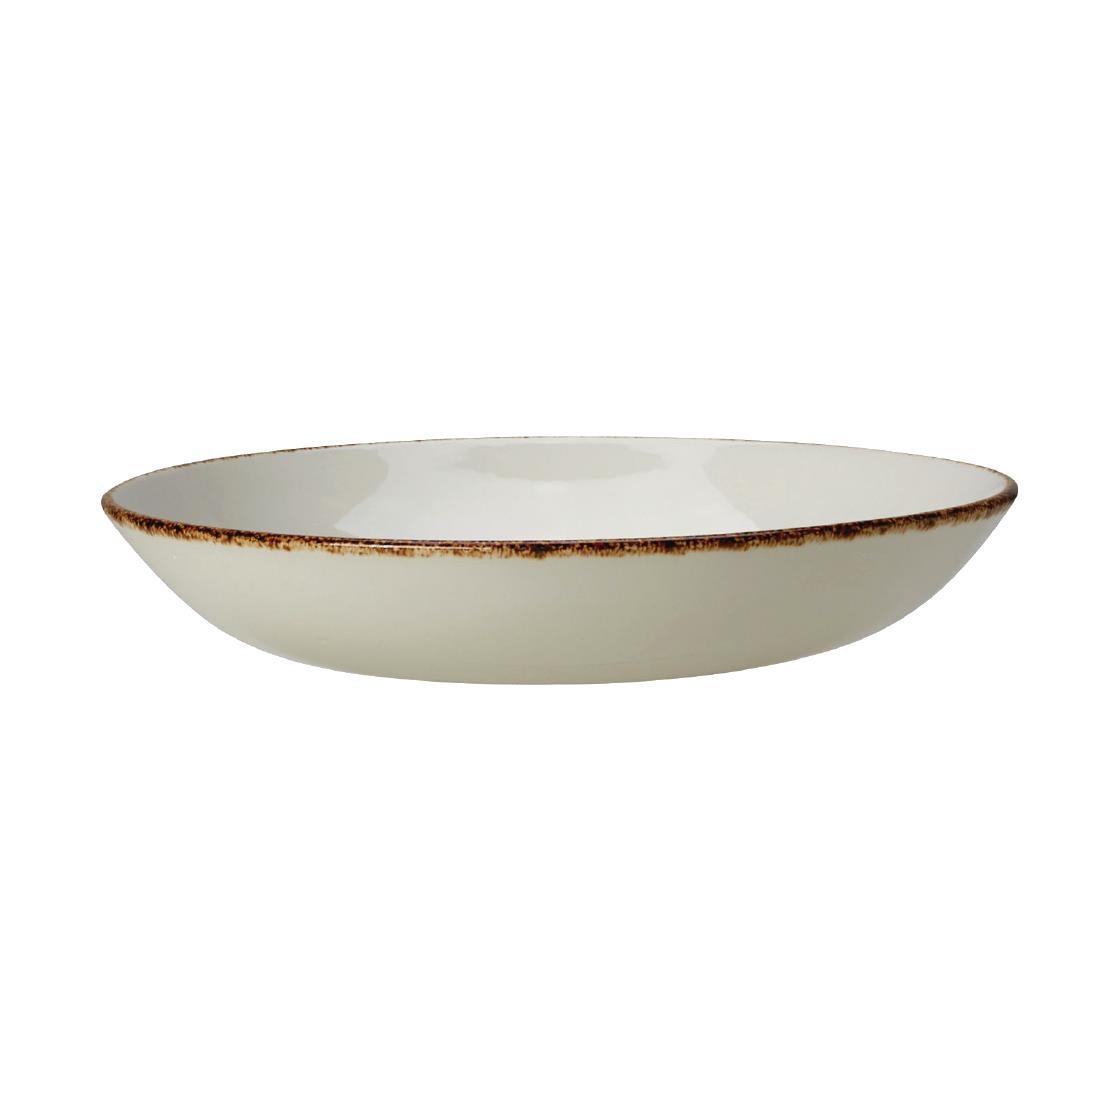 Steelite Brown Dapple Coupe Bowls 290mm (Pack of 6) - VV757  - 2